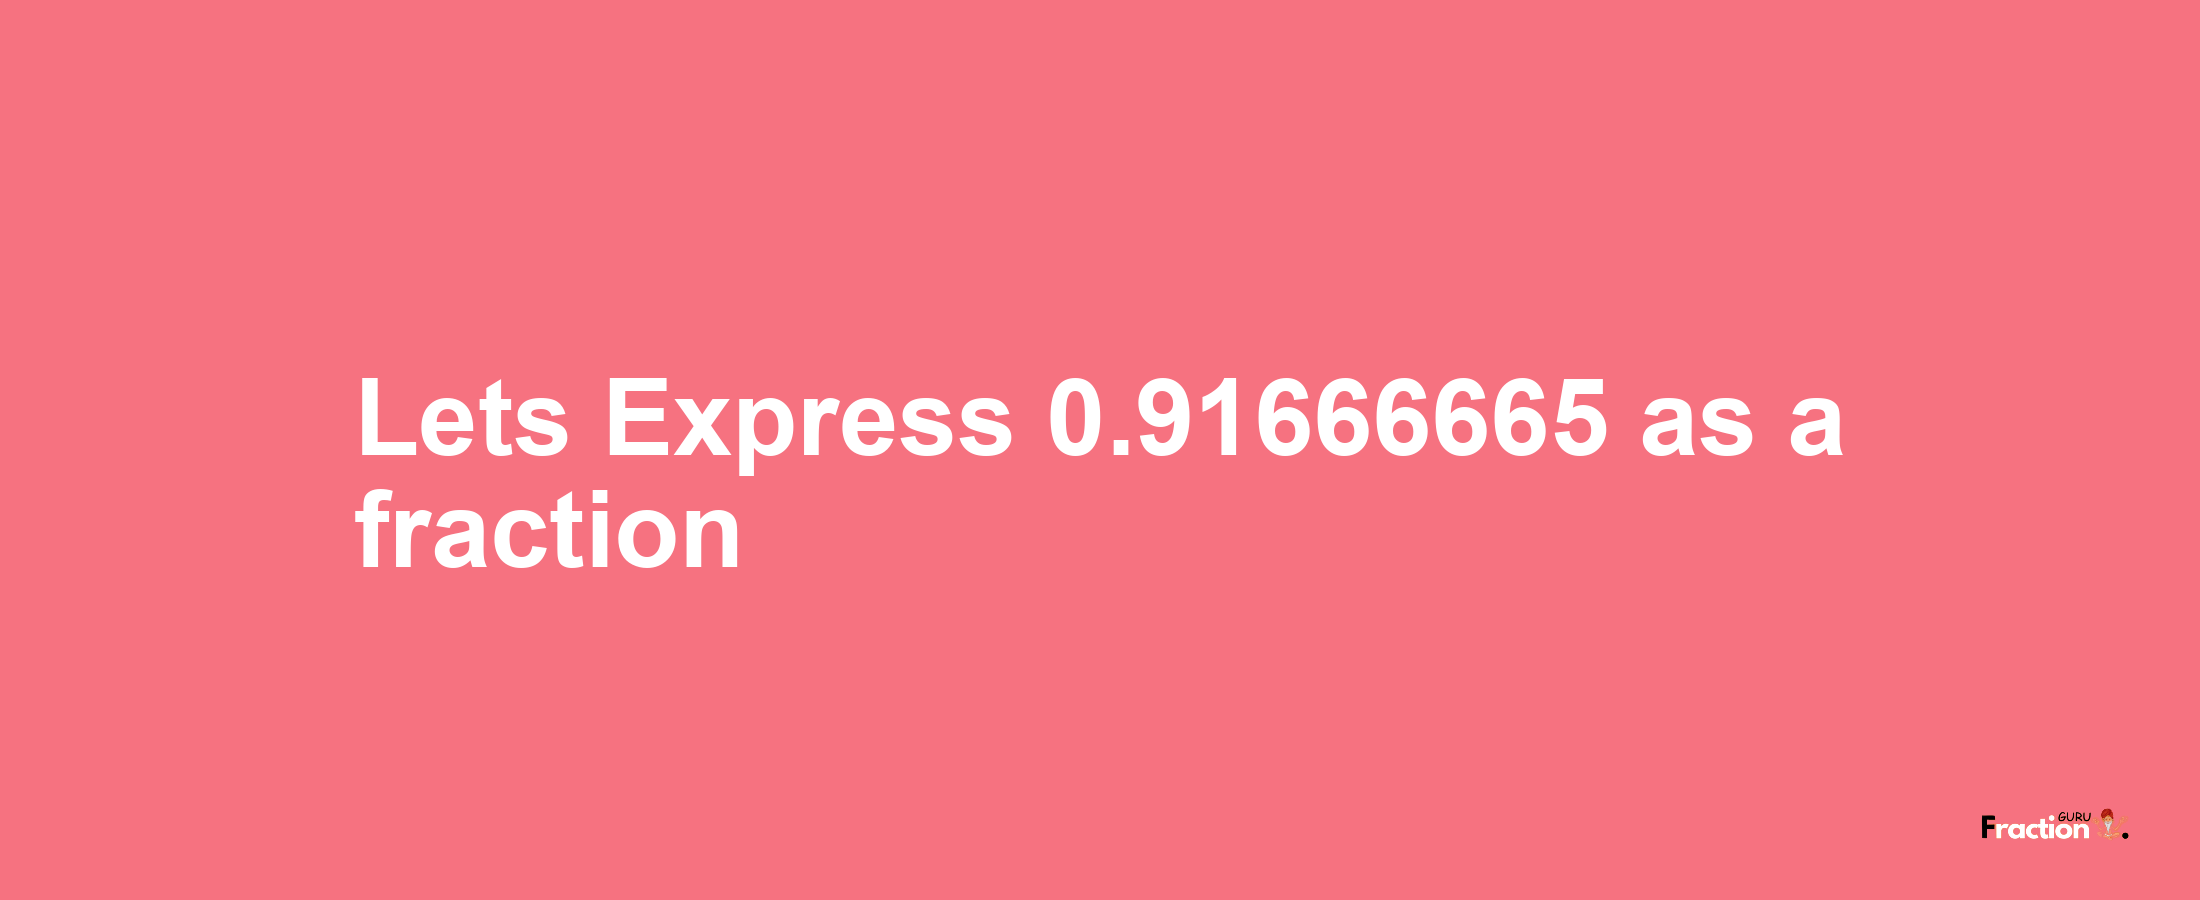 Lets Express 0.91666665 as afraction